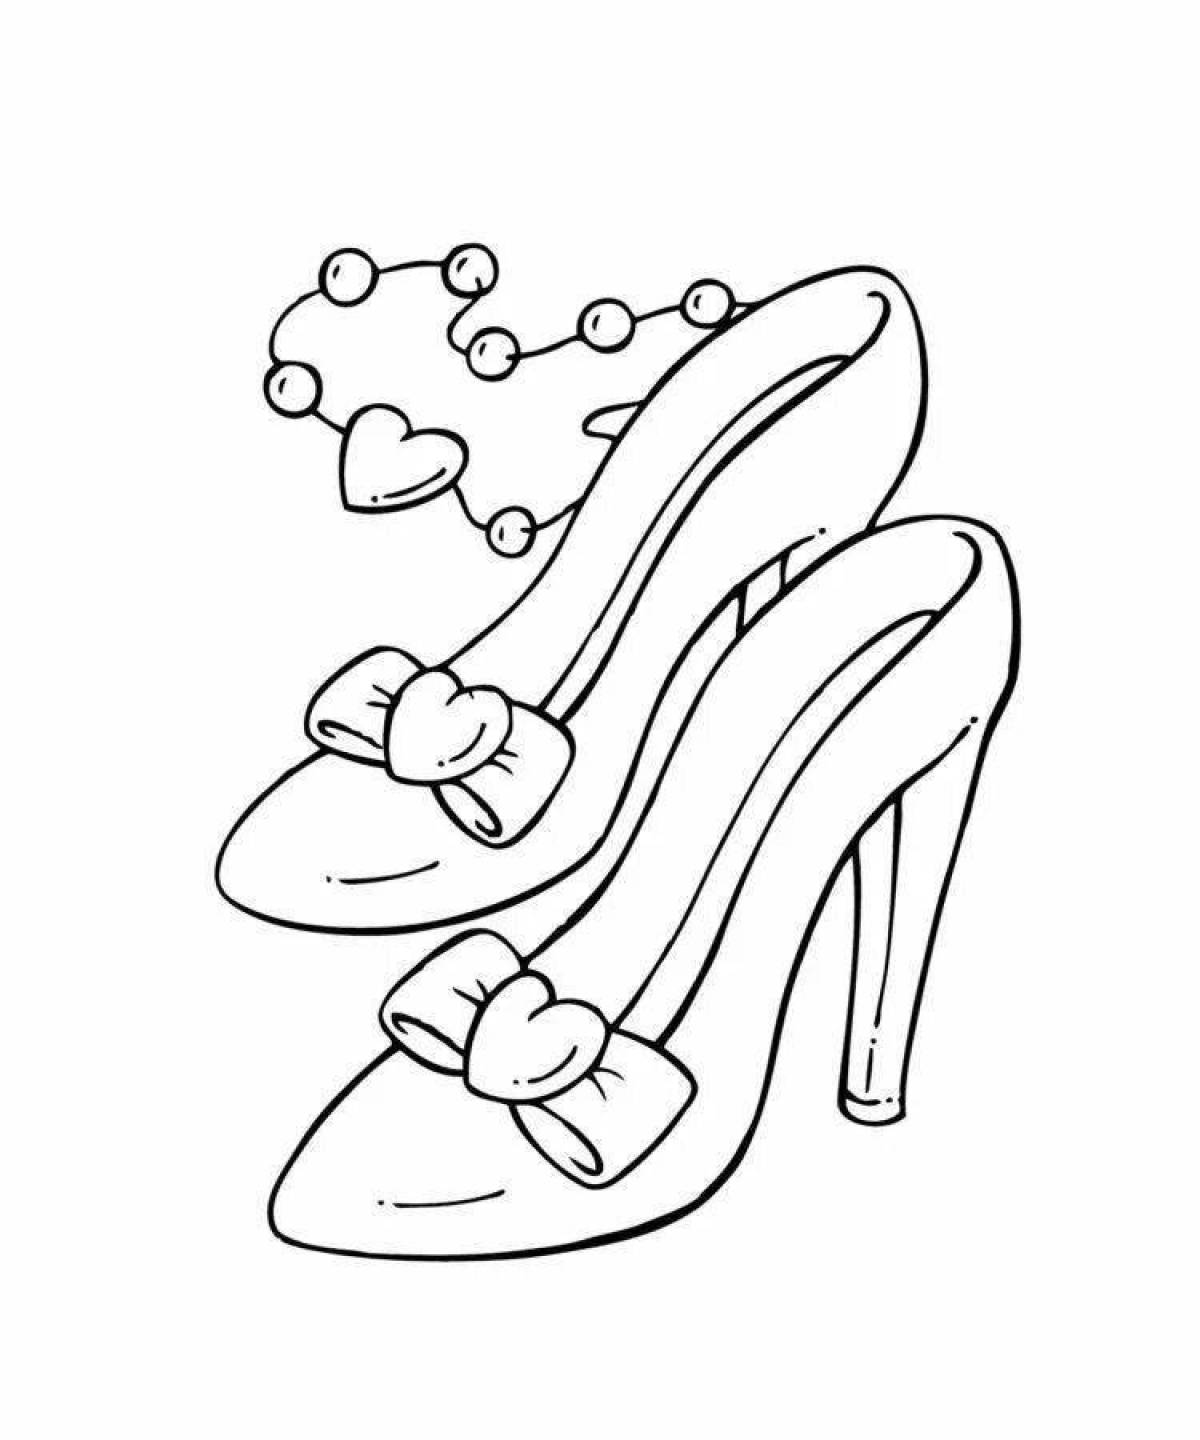 Coloring page cute shoes for kids 5-6 years old